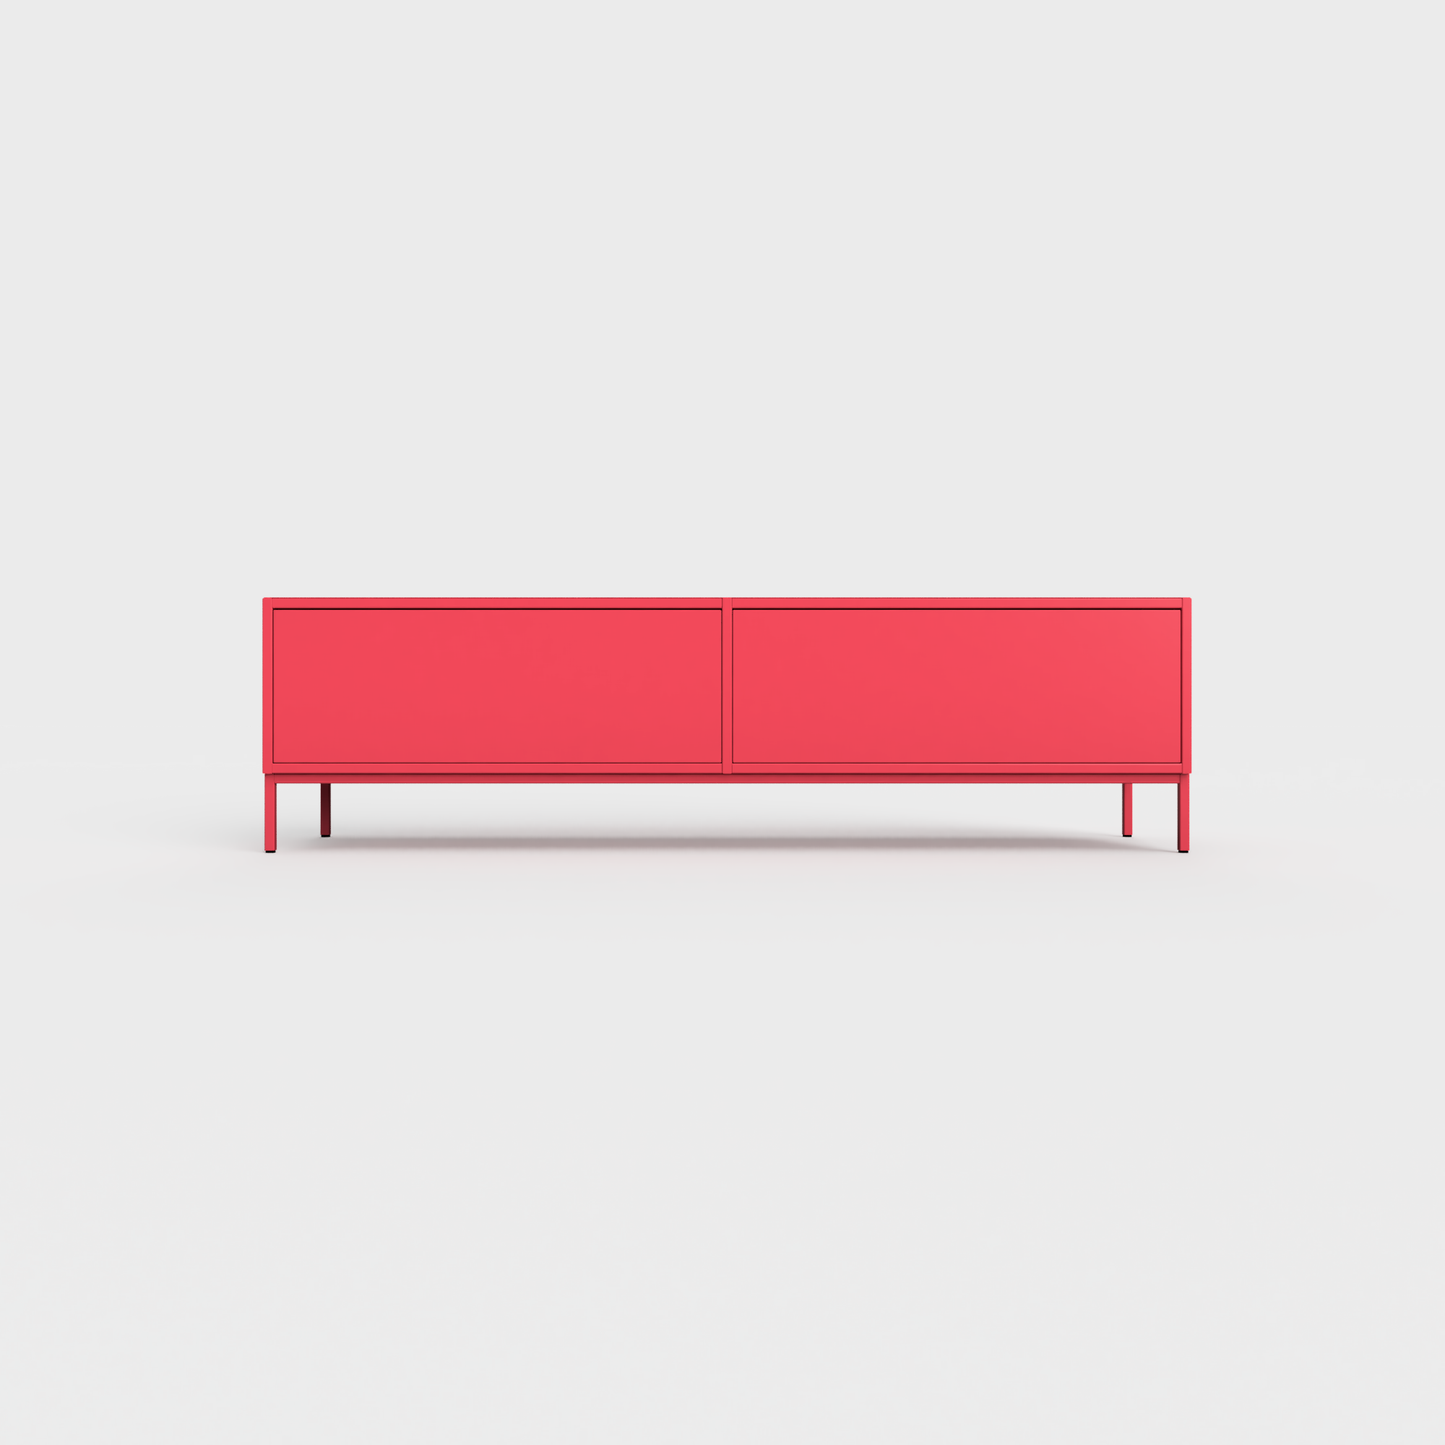 Prunus 01 Lowboard in Raspberry color, powder-coated steel, elegant and modern piece of furniture for your living room